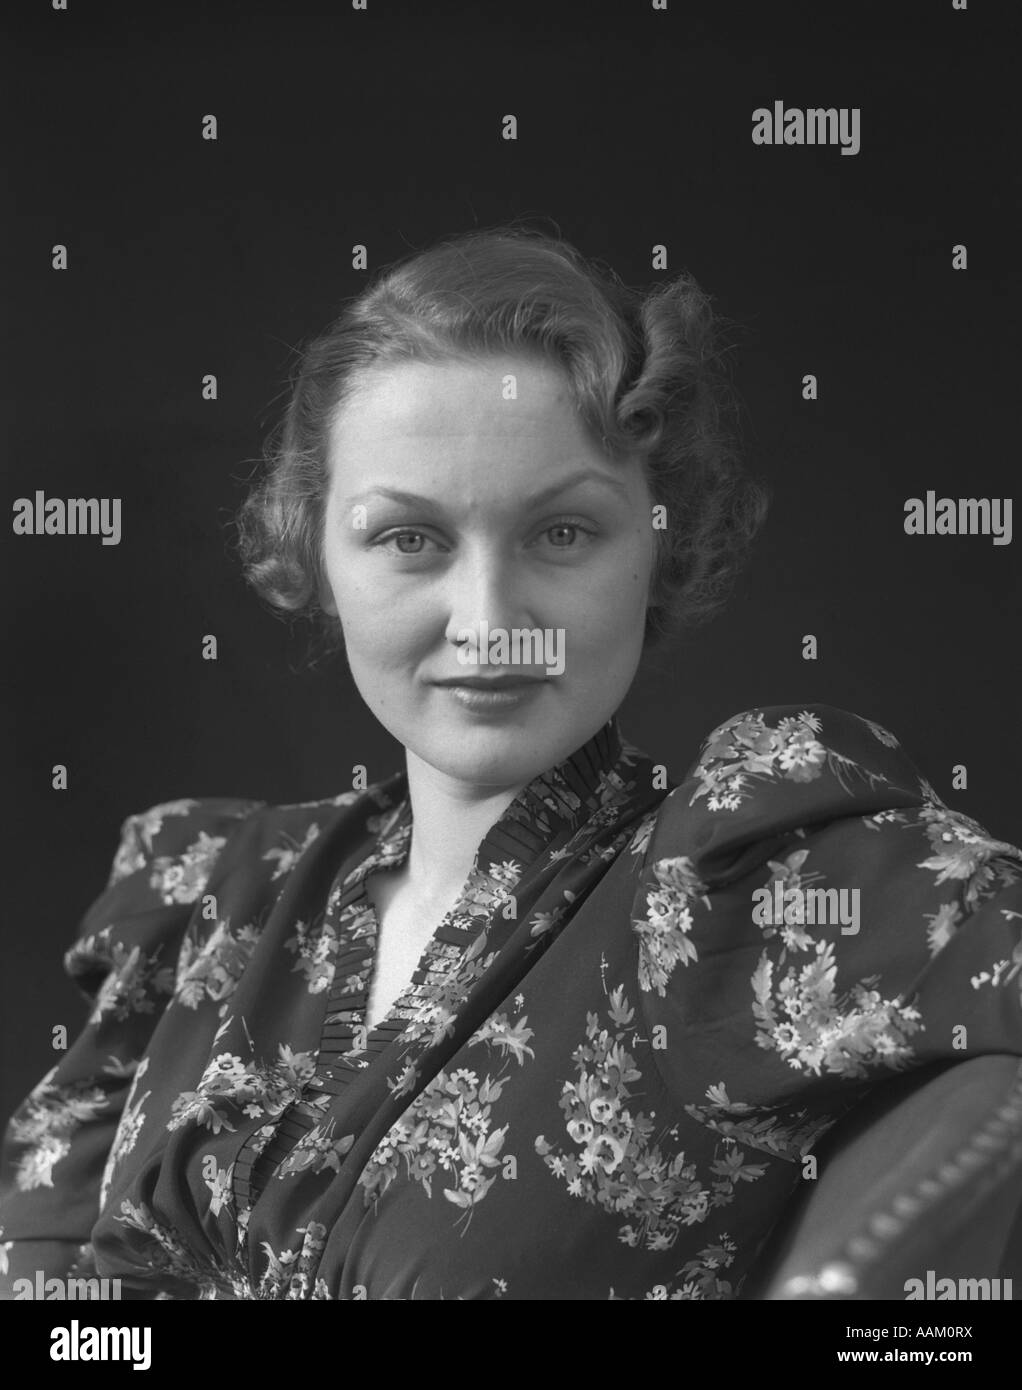 1930s 1940s MIDDLE AGED WOMAN PORTRAIT LOOKING AT CAMERA FLORAL PRINT DRESS Stock Photo